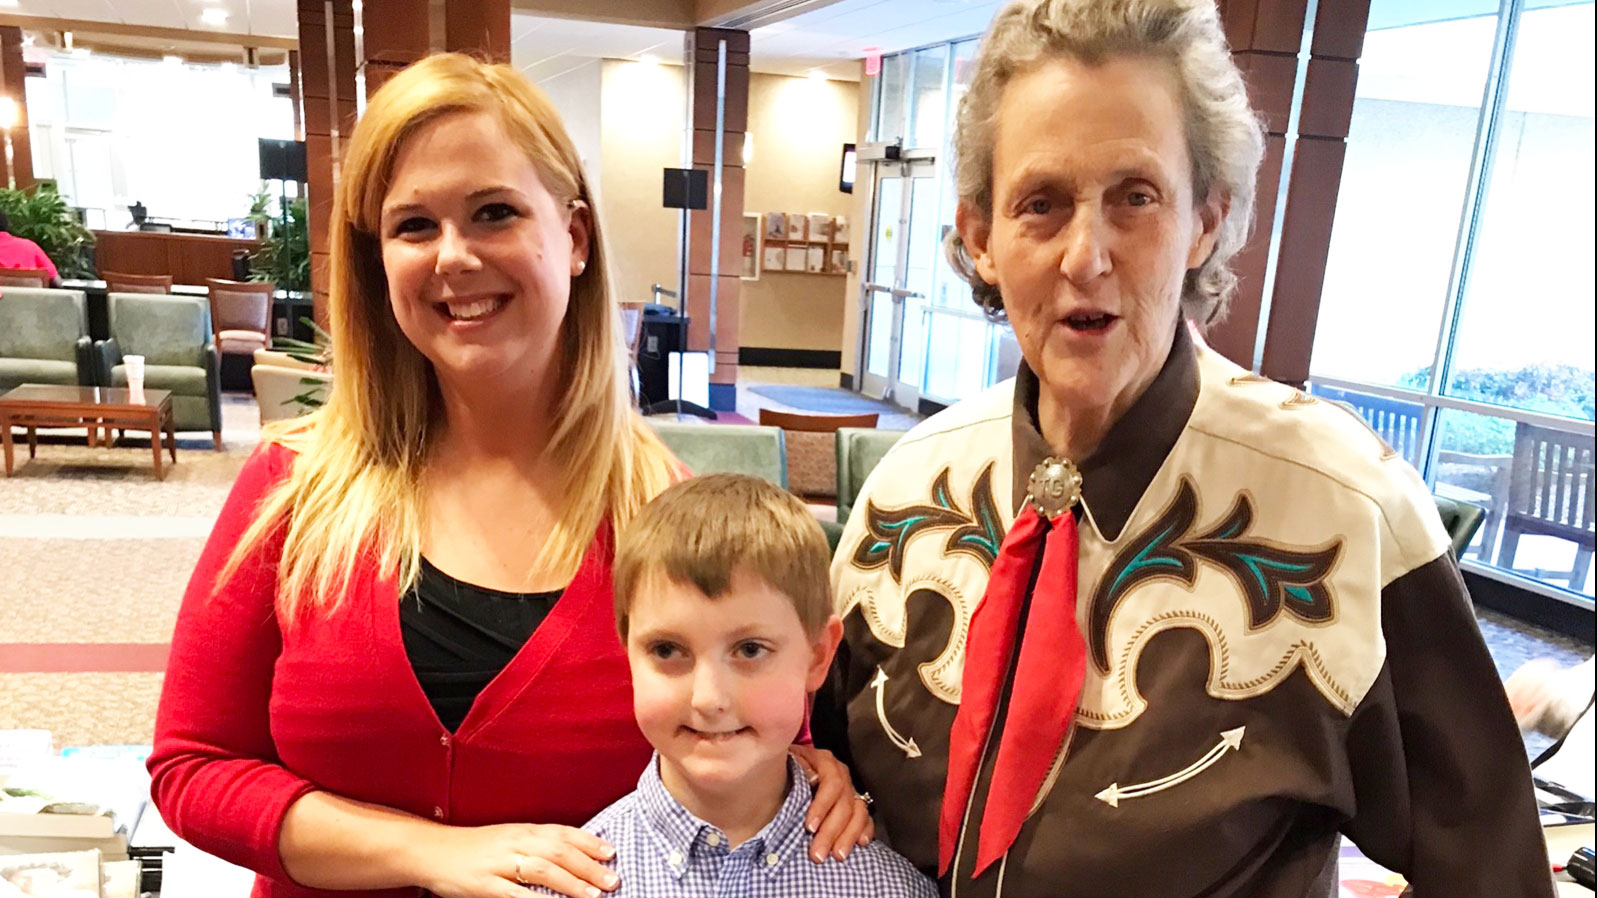 Danielle Pennington and her son Jacob with Temple Grandin.